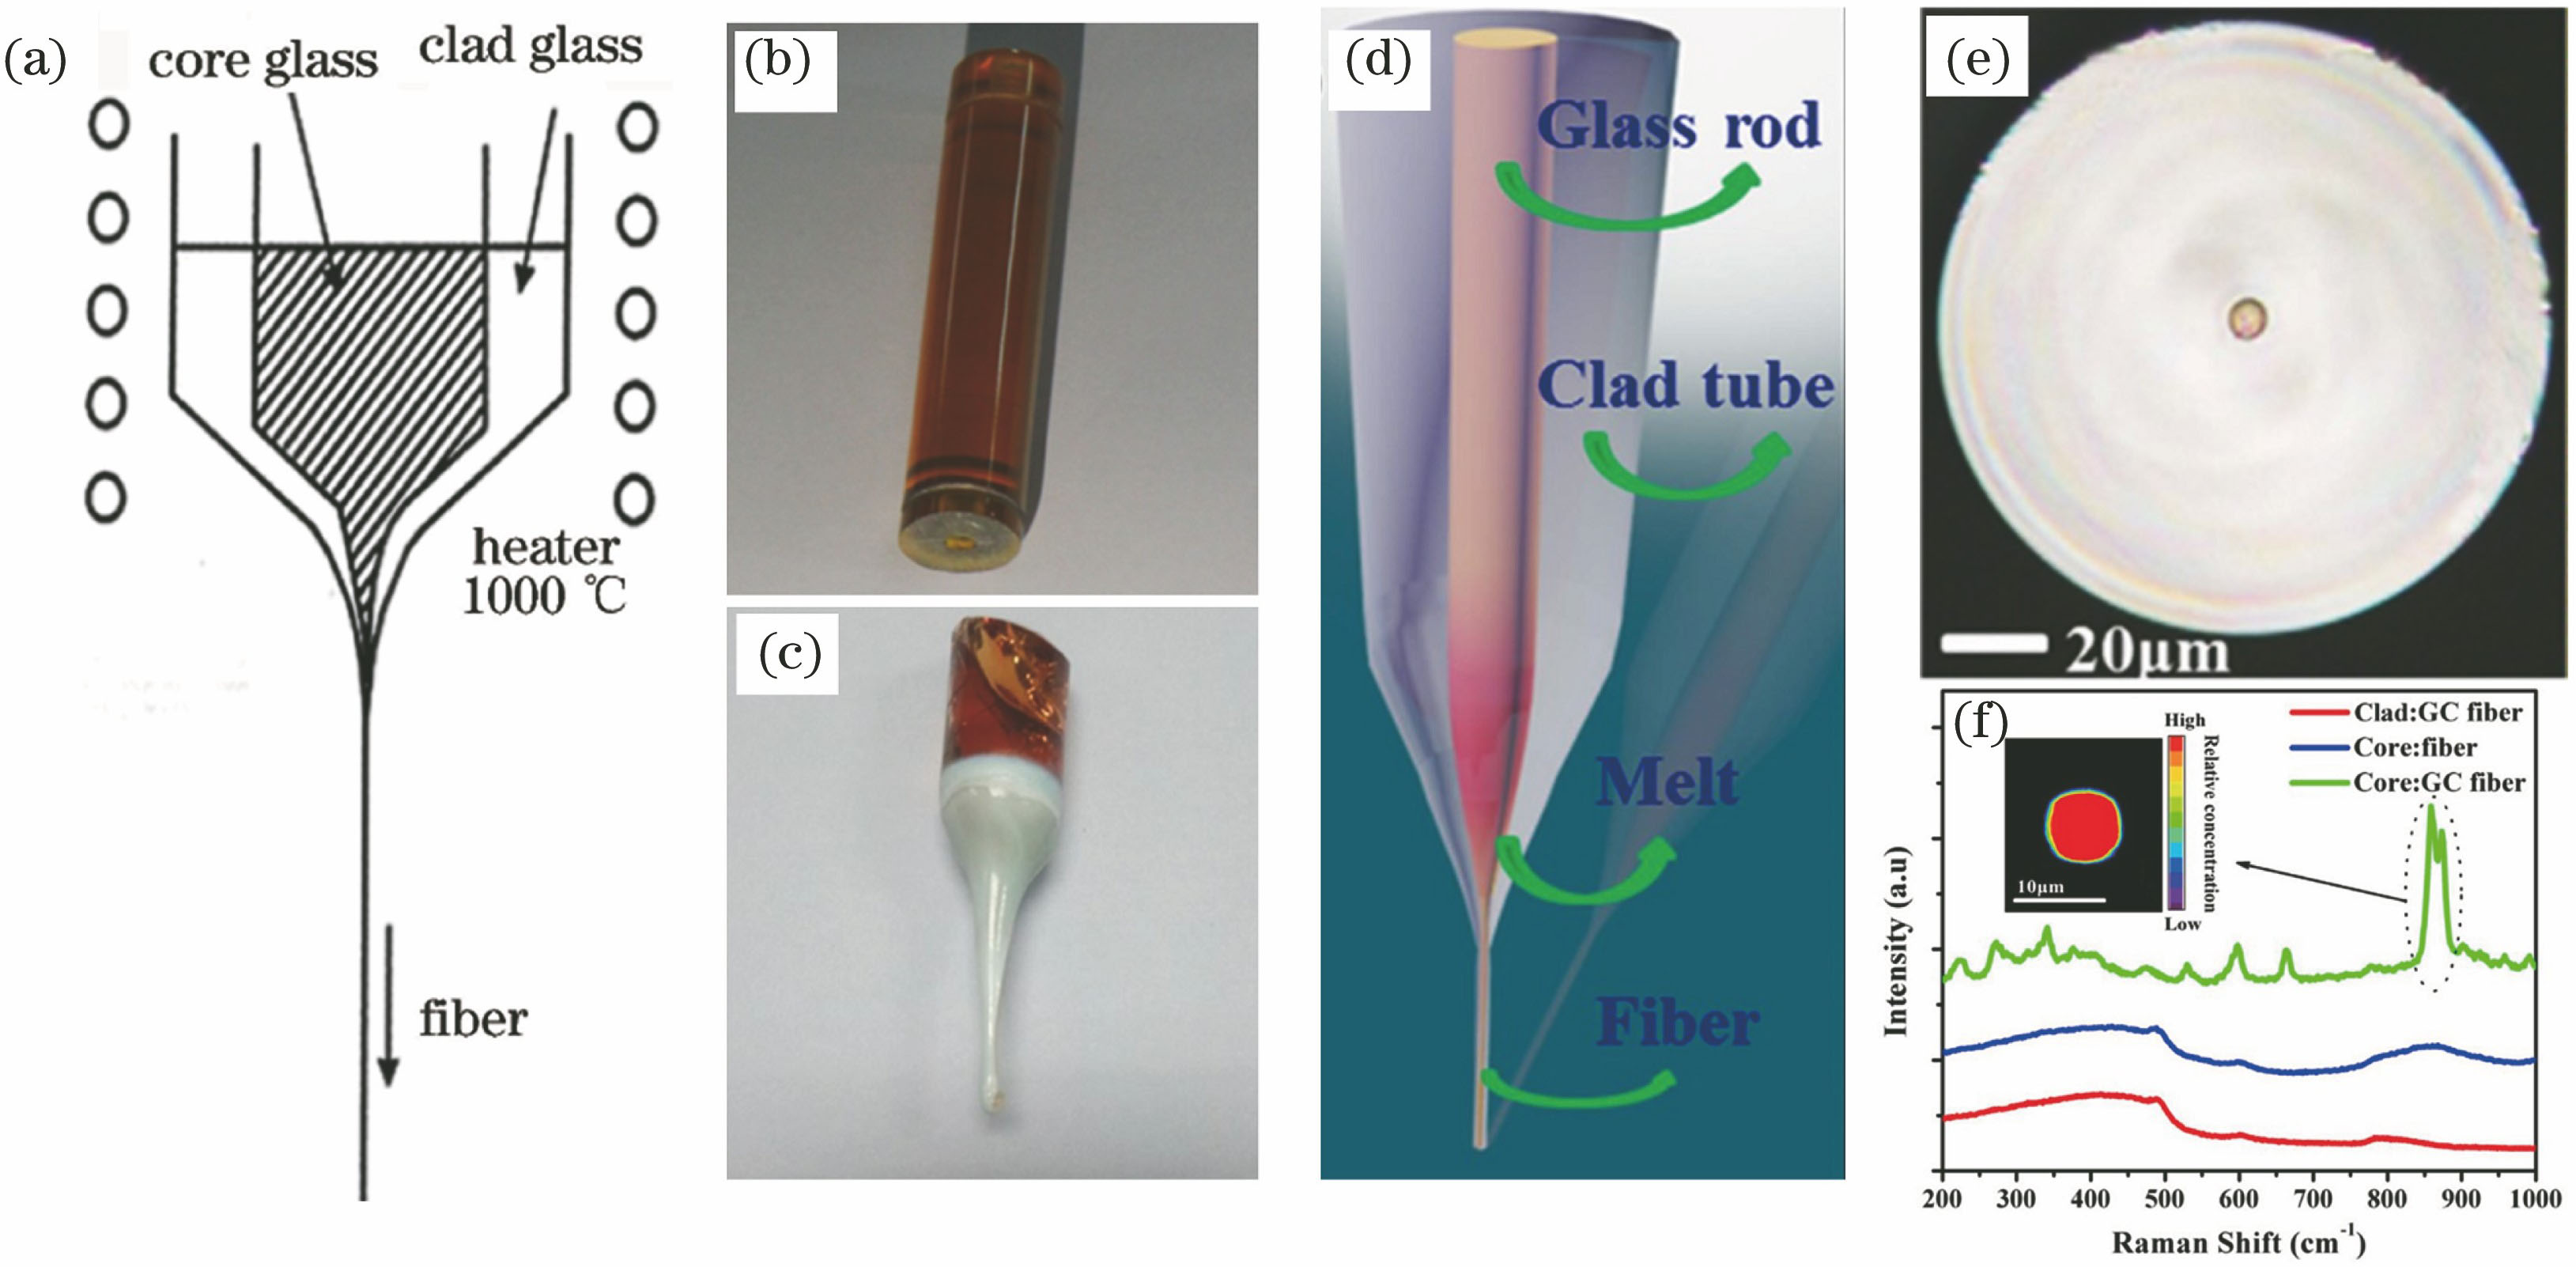 Rare earth ion-doped glass ceramic fibers fabricated by double crucible method, rod-in-tube method, and melt-in-tube method[10-11,13]. (a) Schematic of double crucible method; (b)(c) photos of a glass rod before and after drawing process by rod-in-tube method; (d) schematic of melt-in-tube method; (e)(f) cross section of a glass fiber made by melt-in-tube method and cor